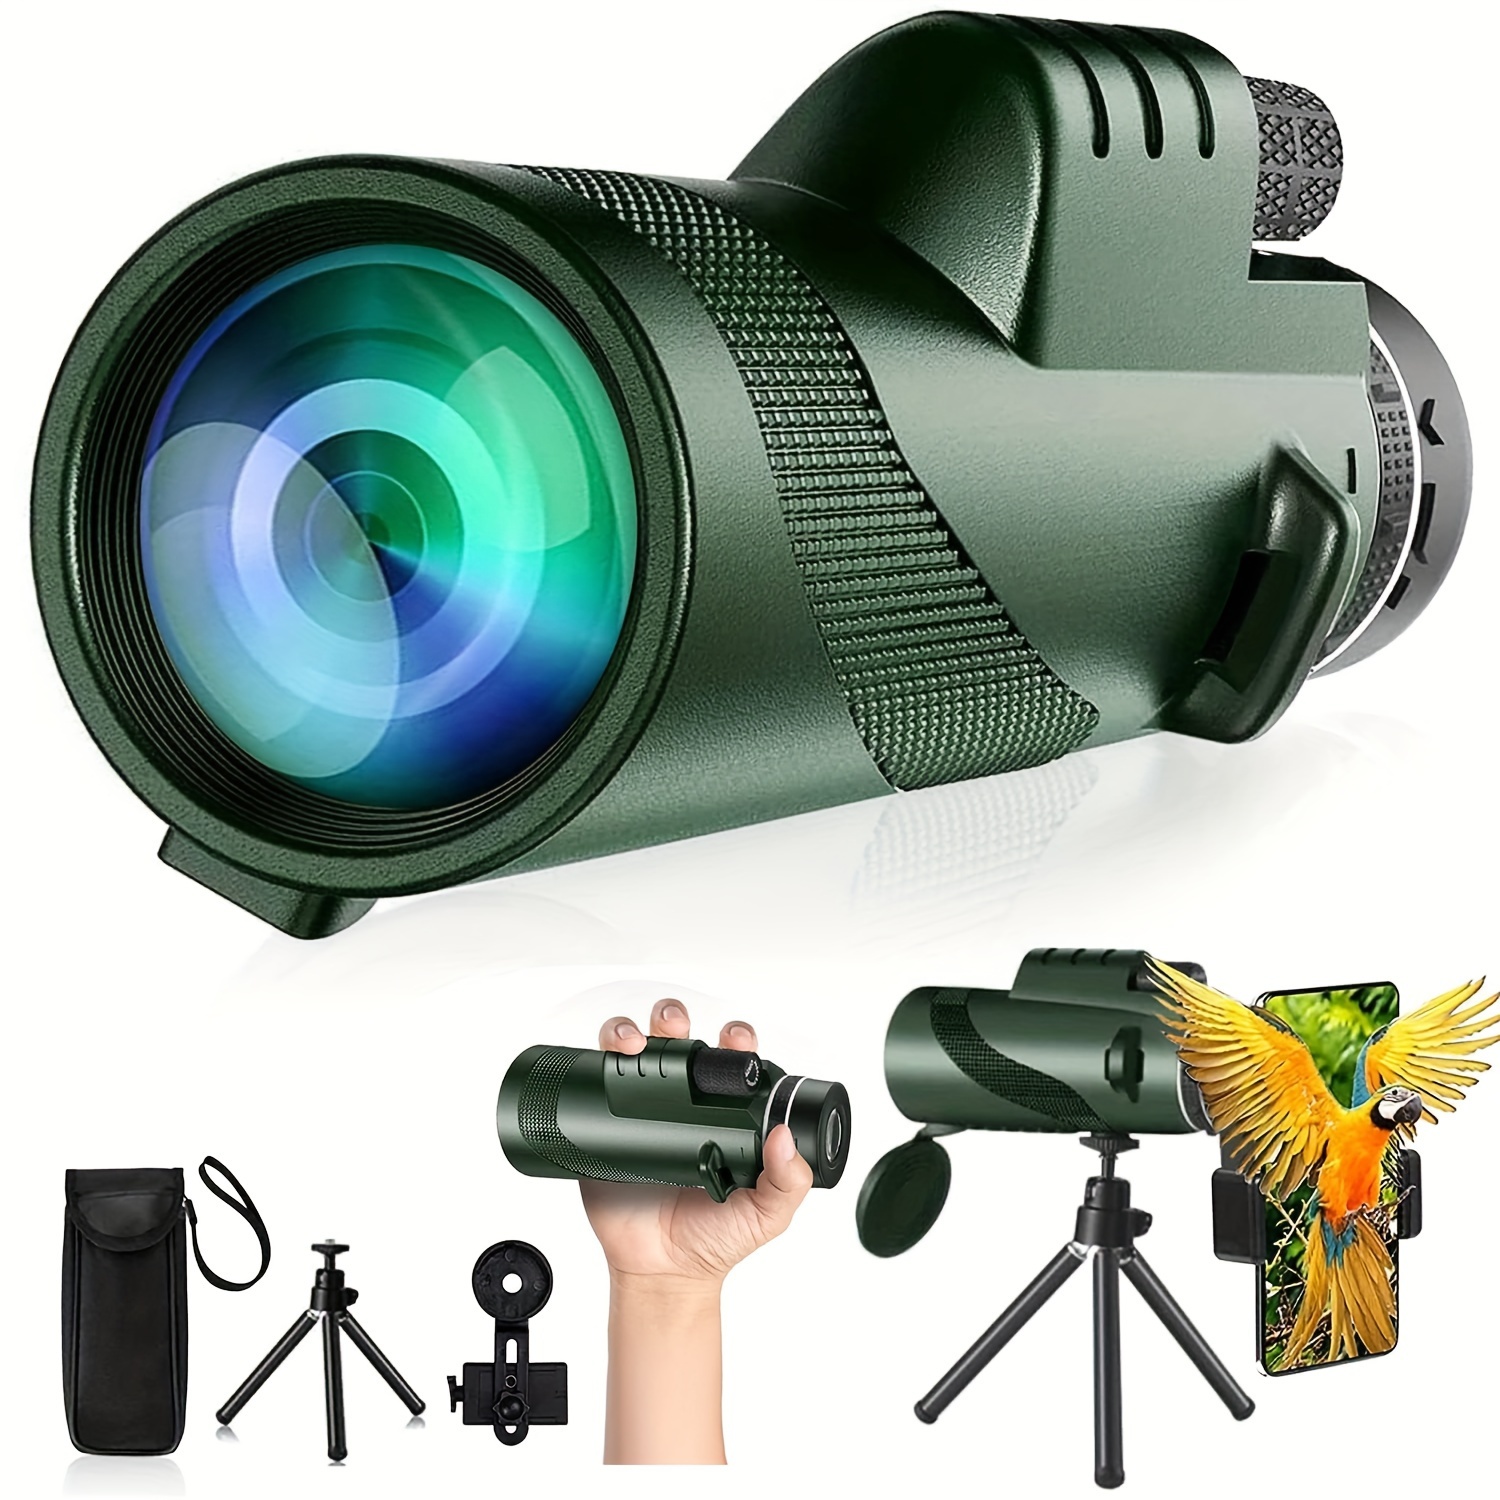 

80x100 High Power Monocular Telescope - Portable, Manual Focus, Smartphone Adapter & Tripod Compatible - Ideal For Adults, Wildlife Bird Watching, Hunting, Camping, Travel, And Scenic